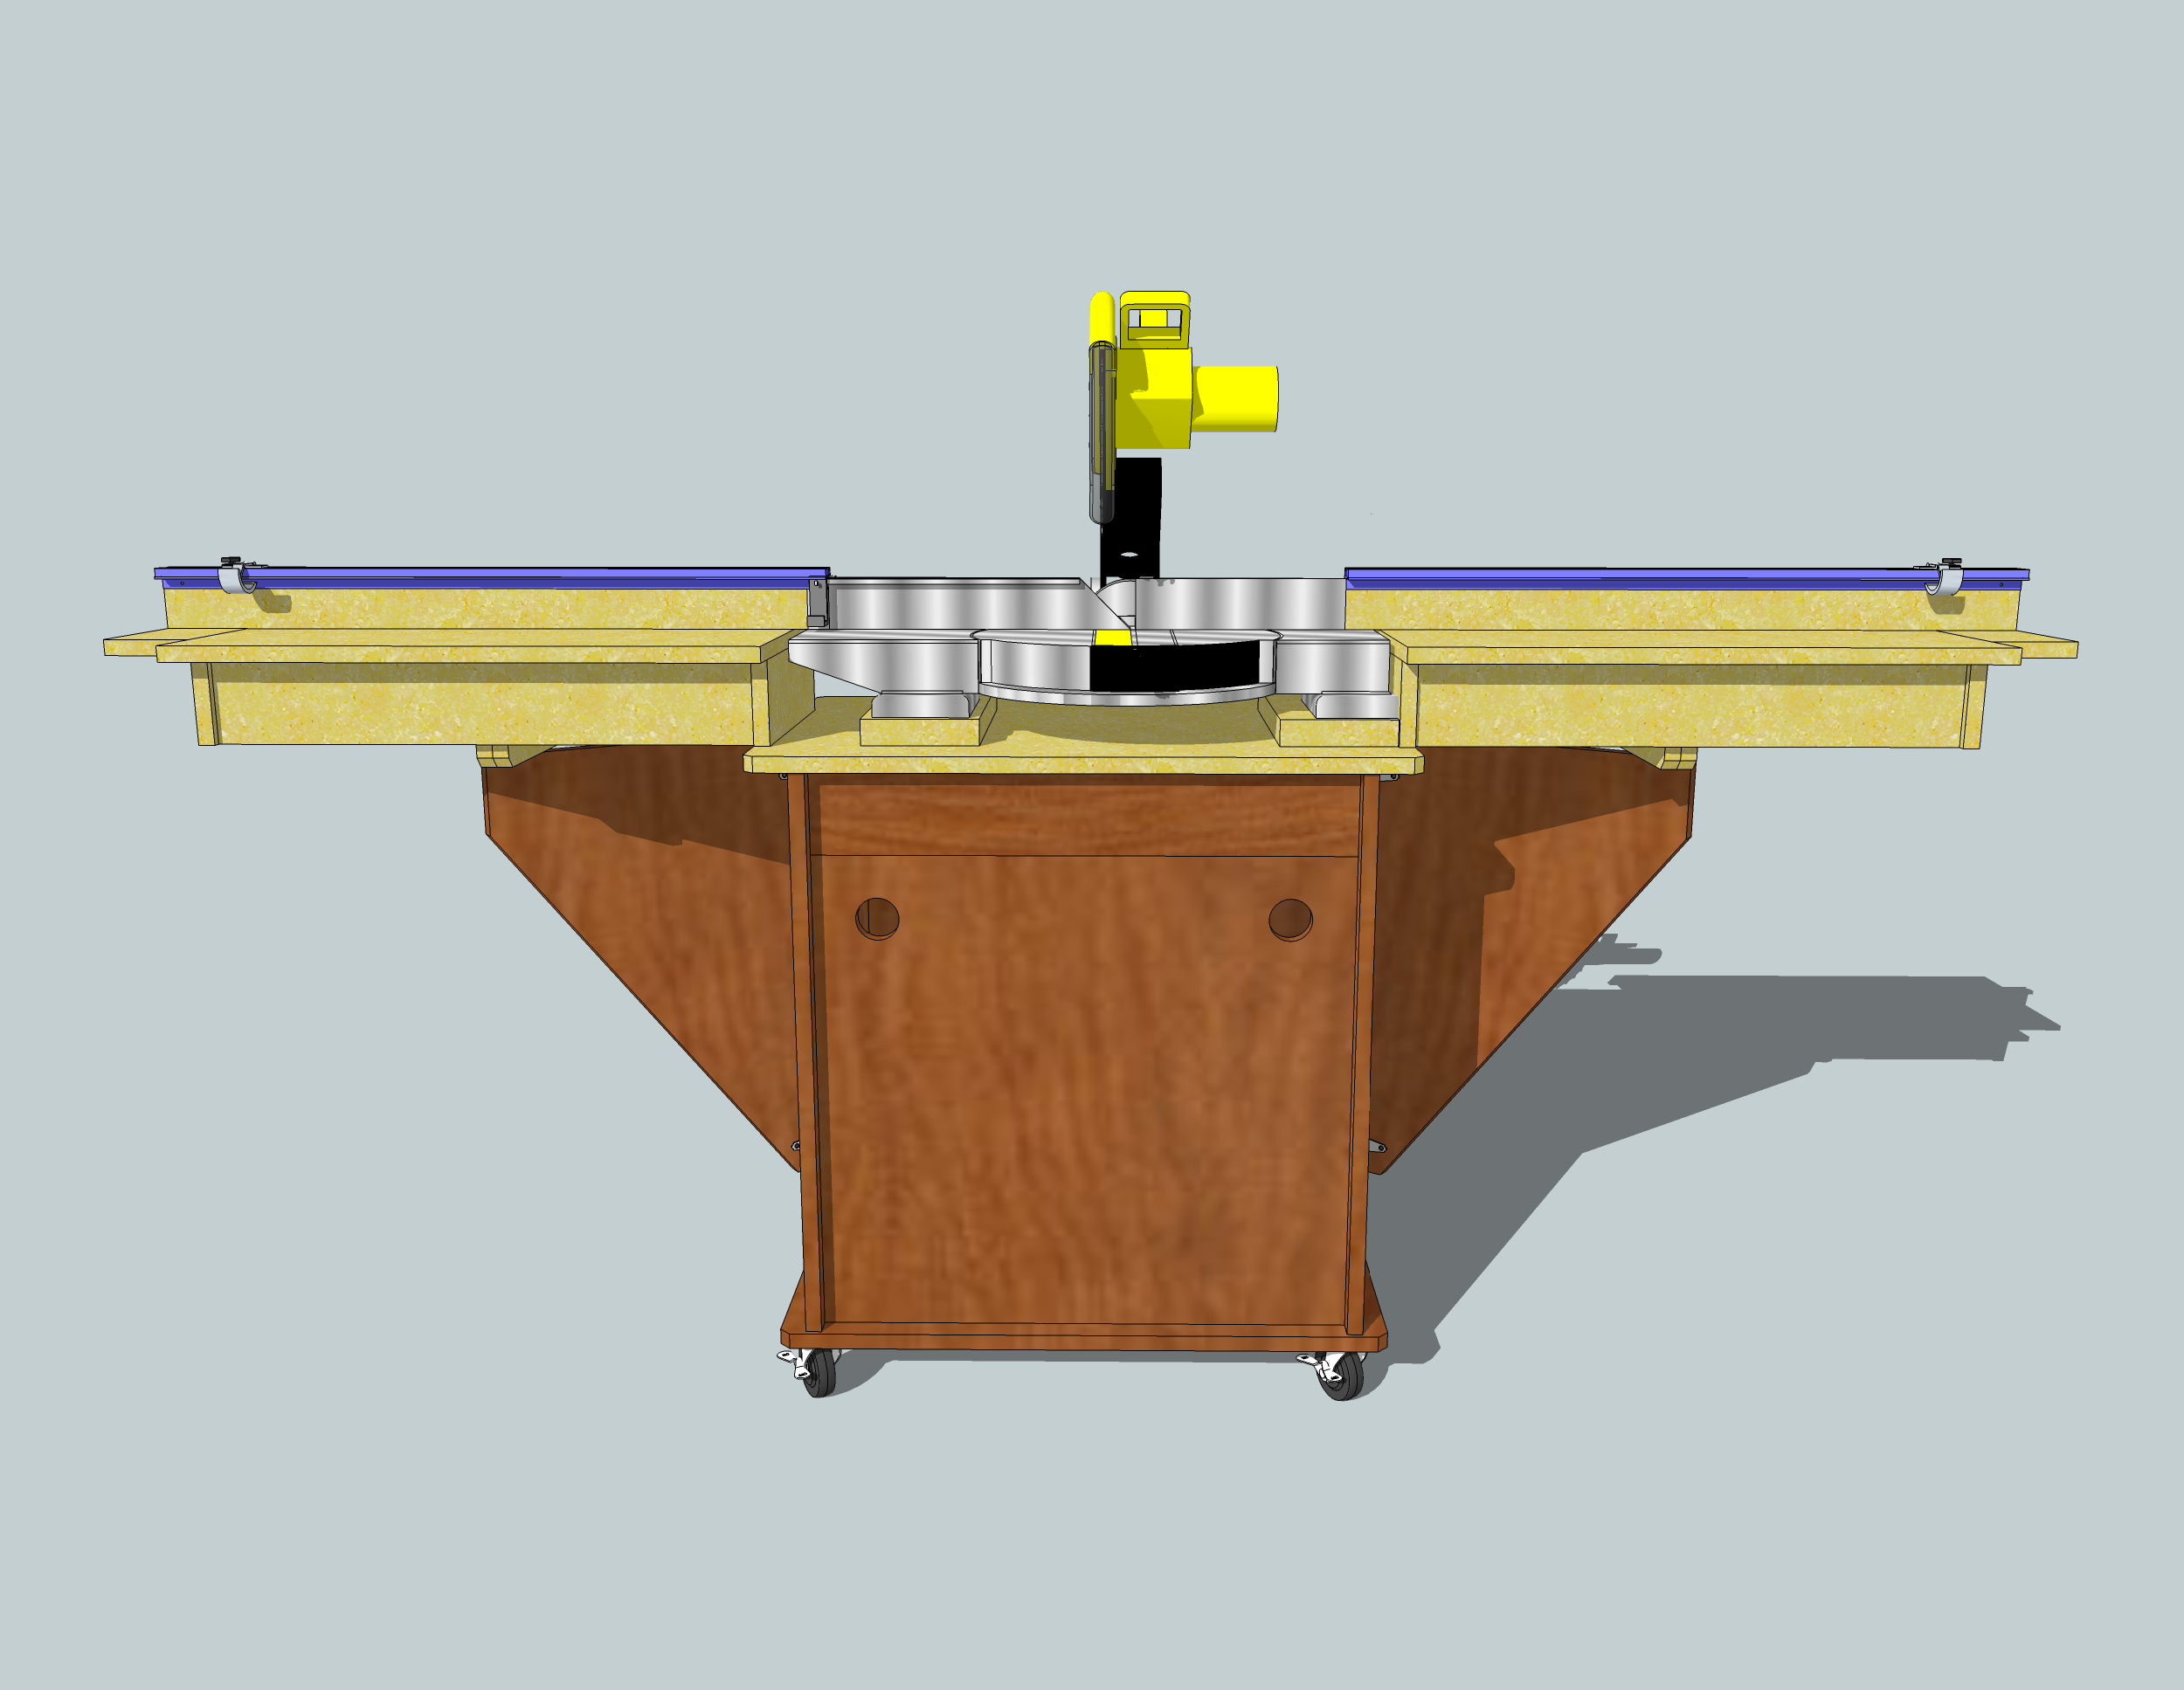 how to build a miter saw stand